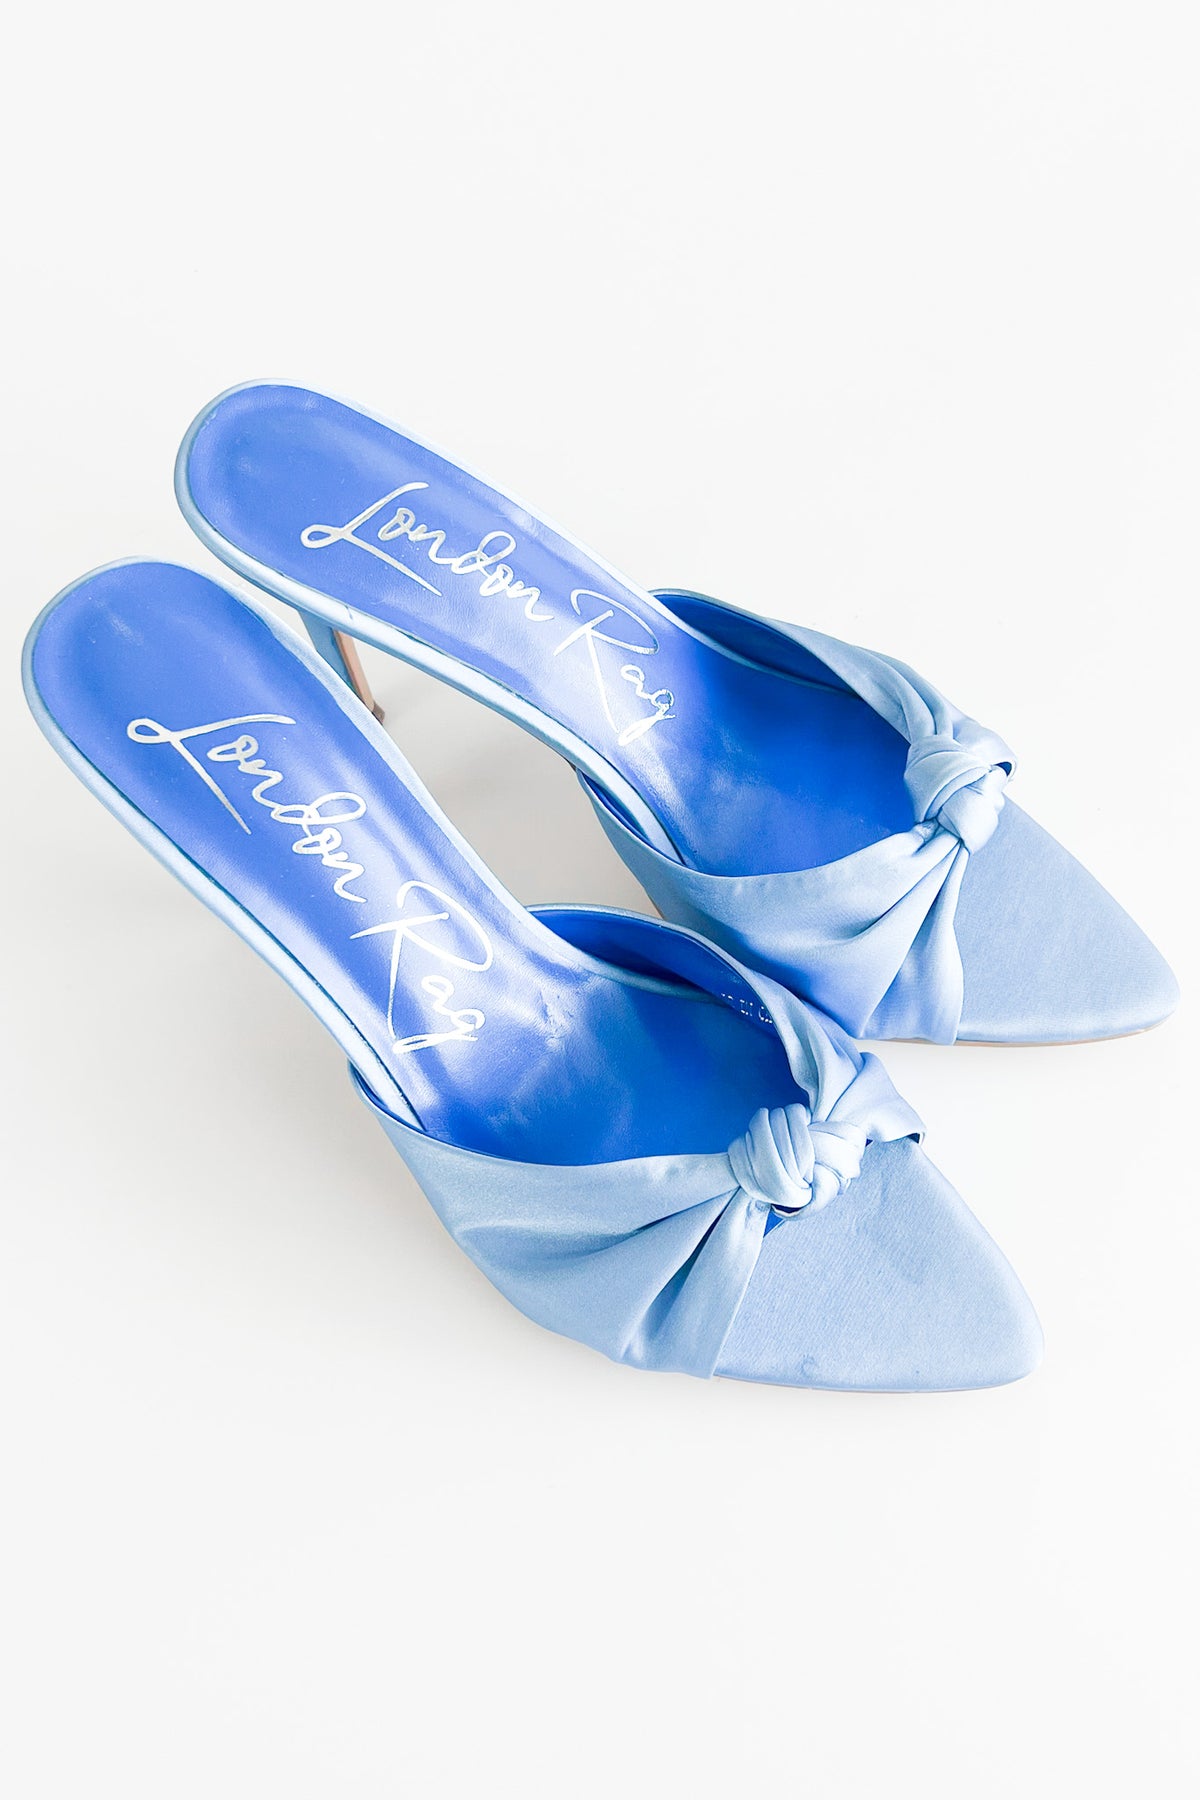 First Crush Satin Knot High Heeled Sandals - Blue-250 Shoes-RagCompany-Coastal Bloom Boutique, find the trendiest versions of the popular styles and looks Located in Indialantic, FL